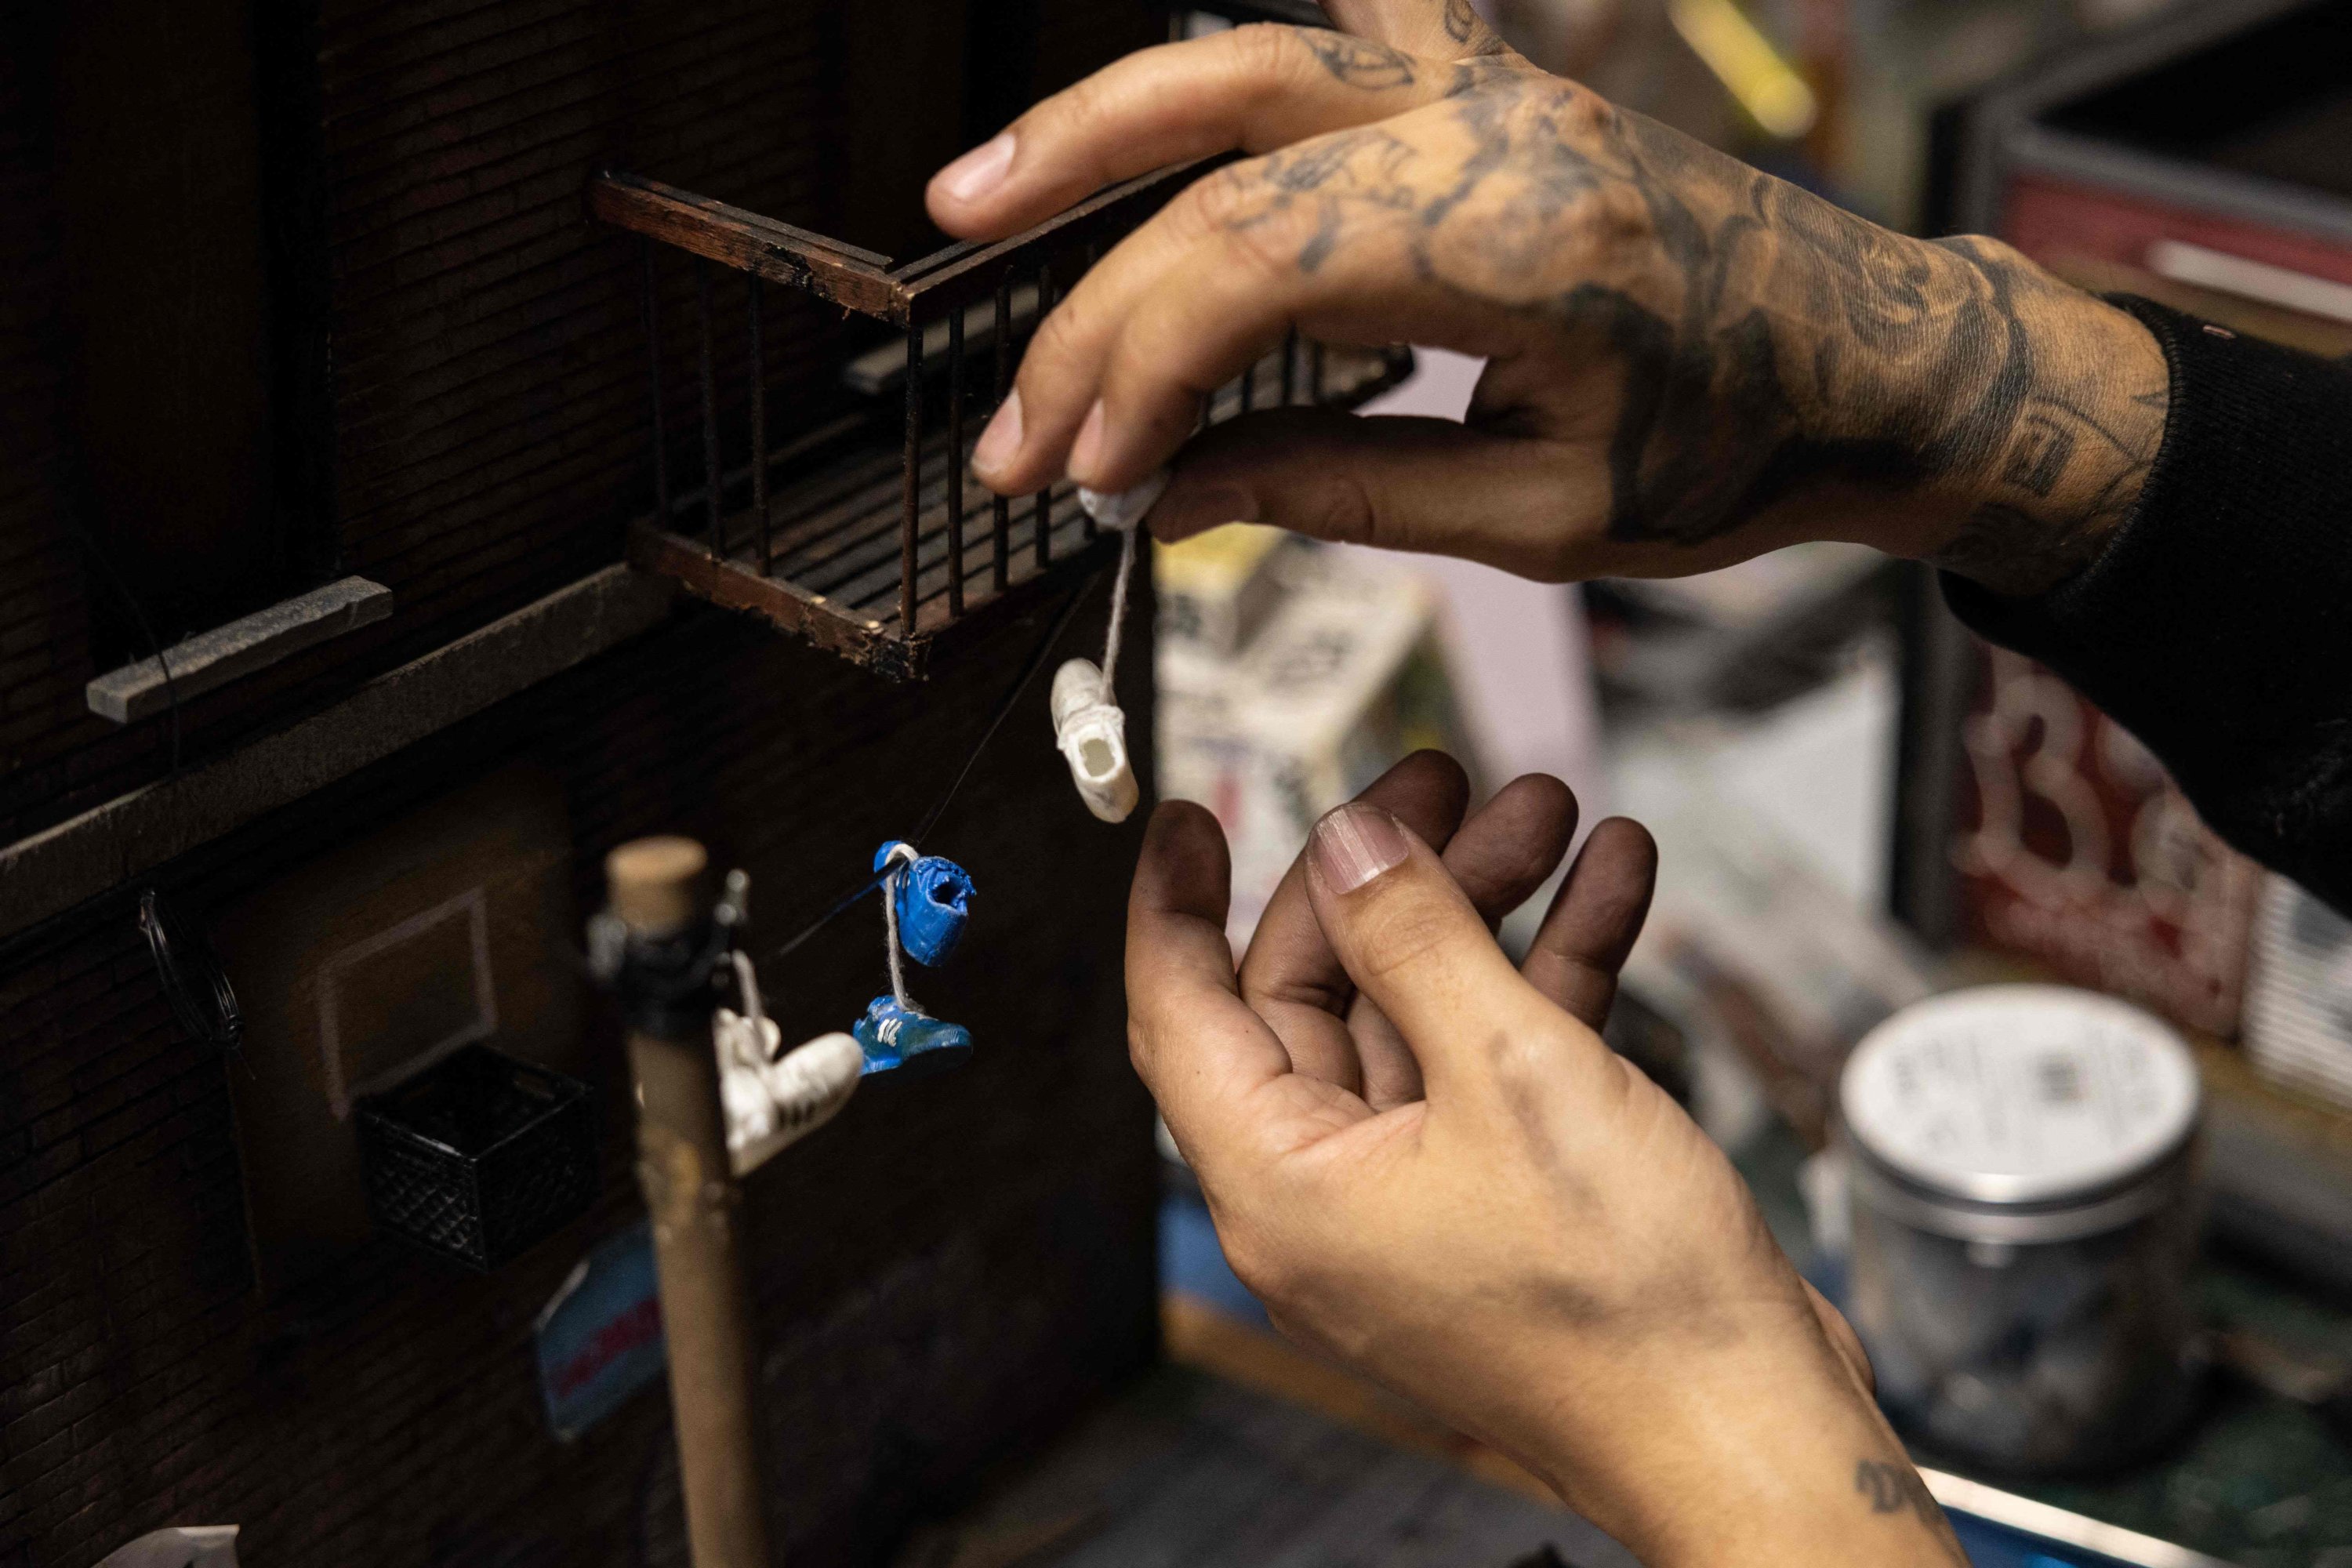 Danny Cortes, a street miniature artist, works on a new miniature at his studio in the Brooklyn borough of New York City, U.S., Dec. 19, 2022. (AFP Photo)